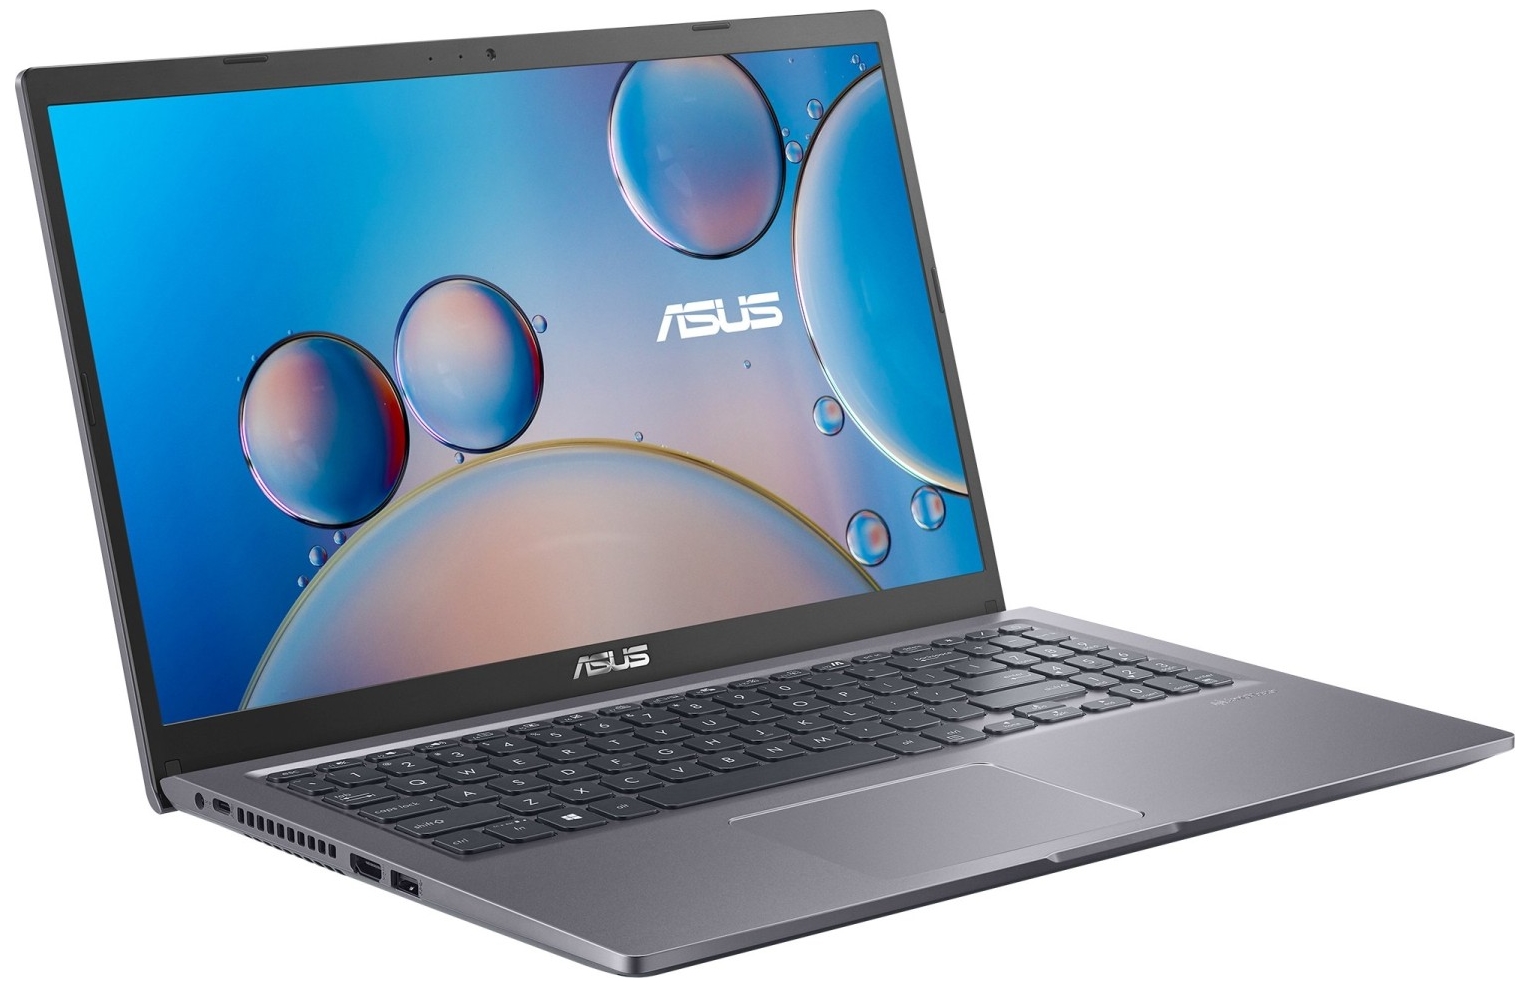 Ноутбук ASUS r565ja-br594t. ASUS Laptop x515. ASUS x415jf-BV131.14. ASUS x515jf-br199t.